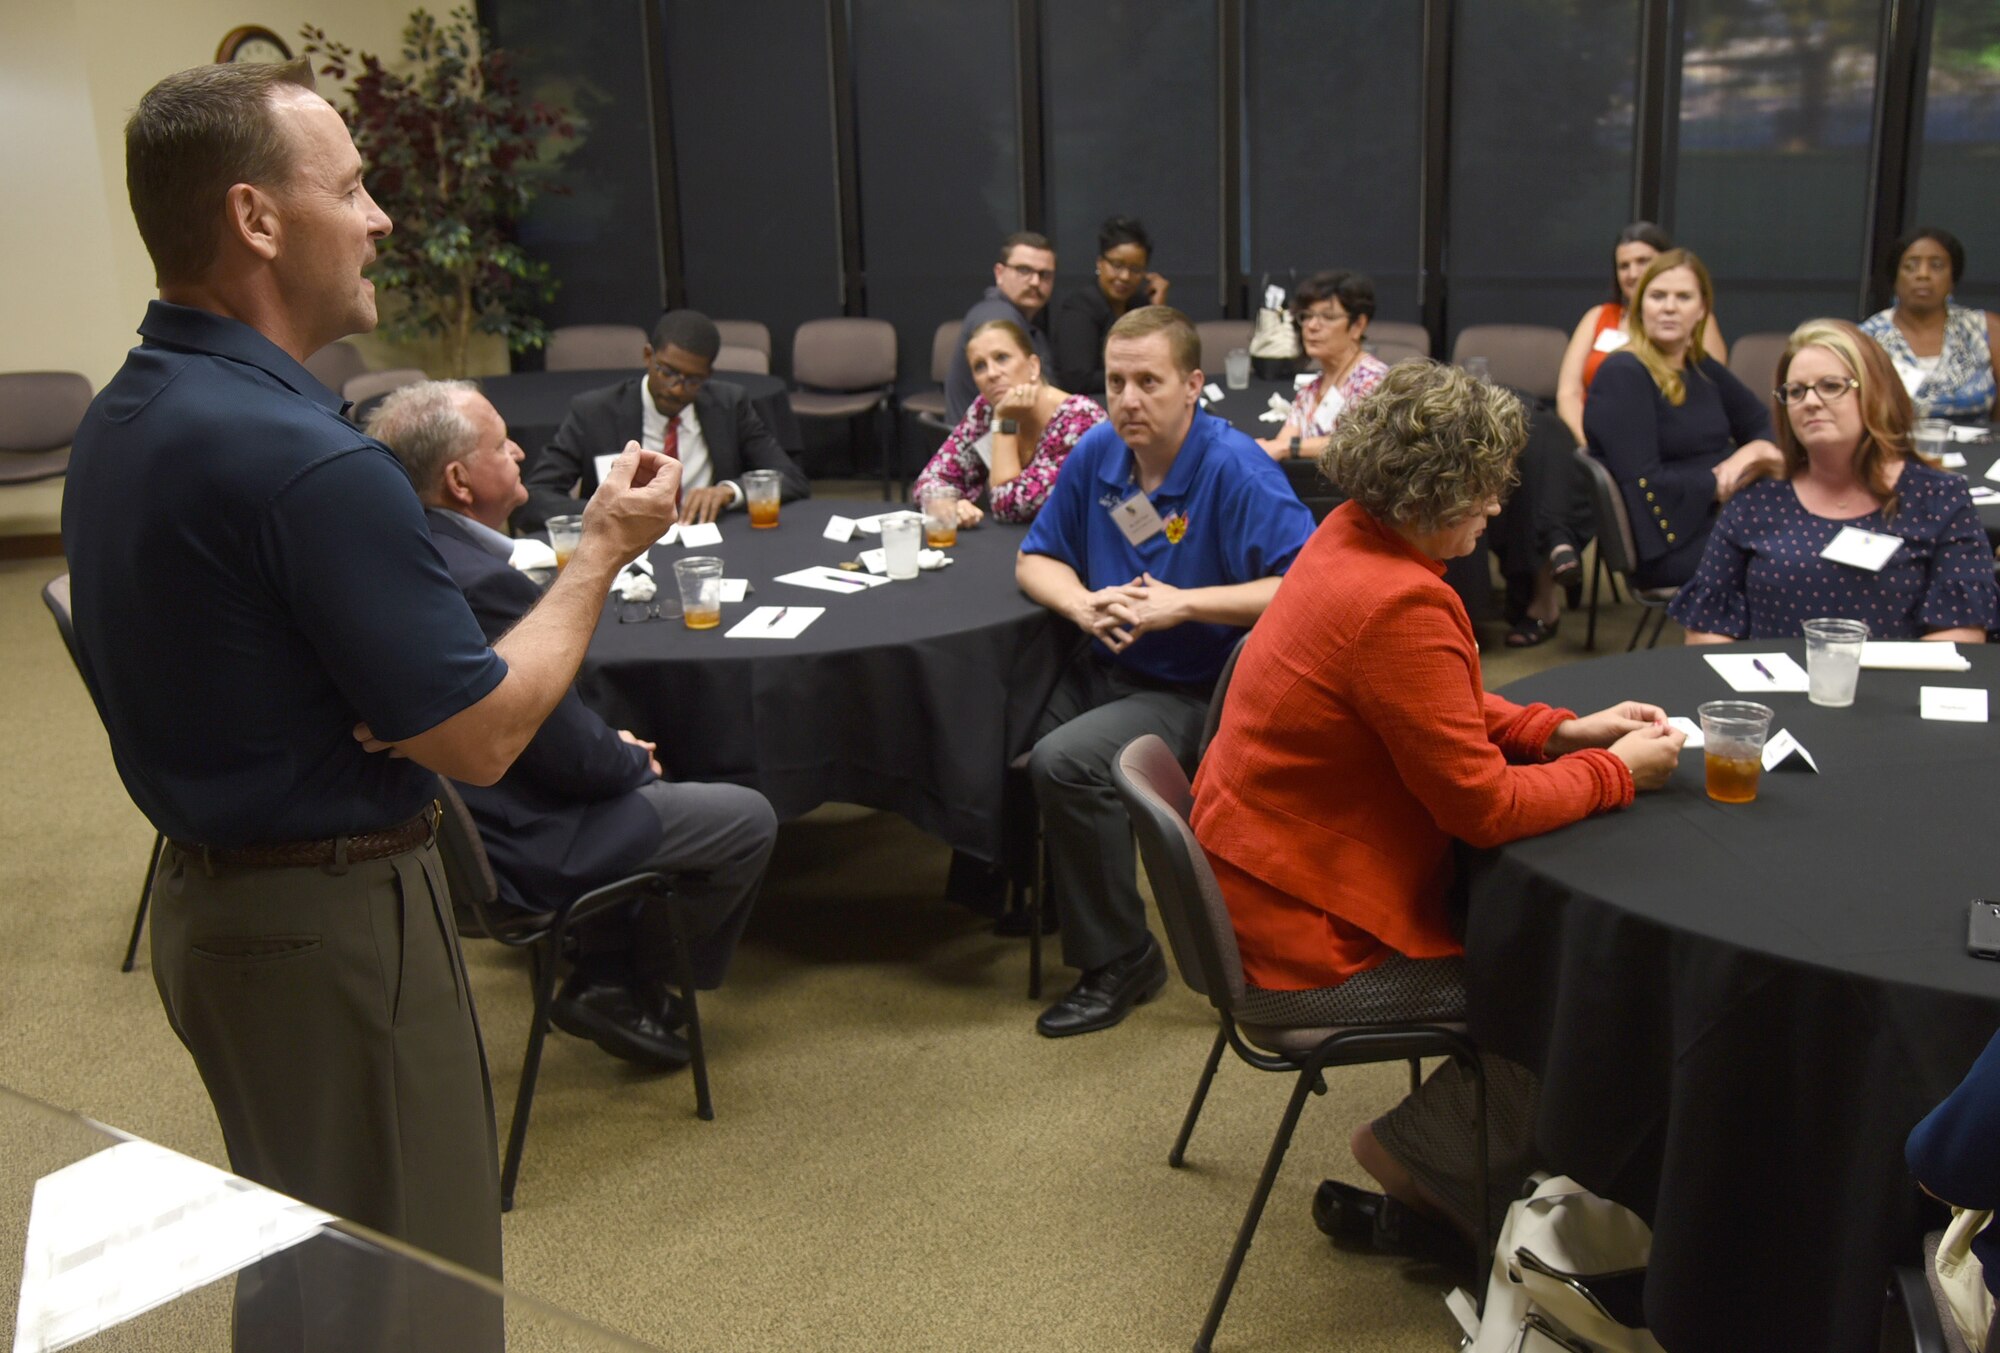 Col. Paul Filcek, 72nd Air Base Wing and Tinker installation commander, welcomes attendees to the Mental Wellness Community Dinner held at the Midwest City Chamber of Commerce Sept. 4, 2019. Community helping agencies and members of Team Tinker were able to share information and ideas on suicide prevention and mental well-being during the event.